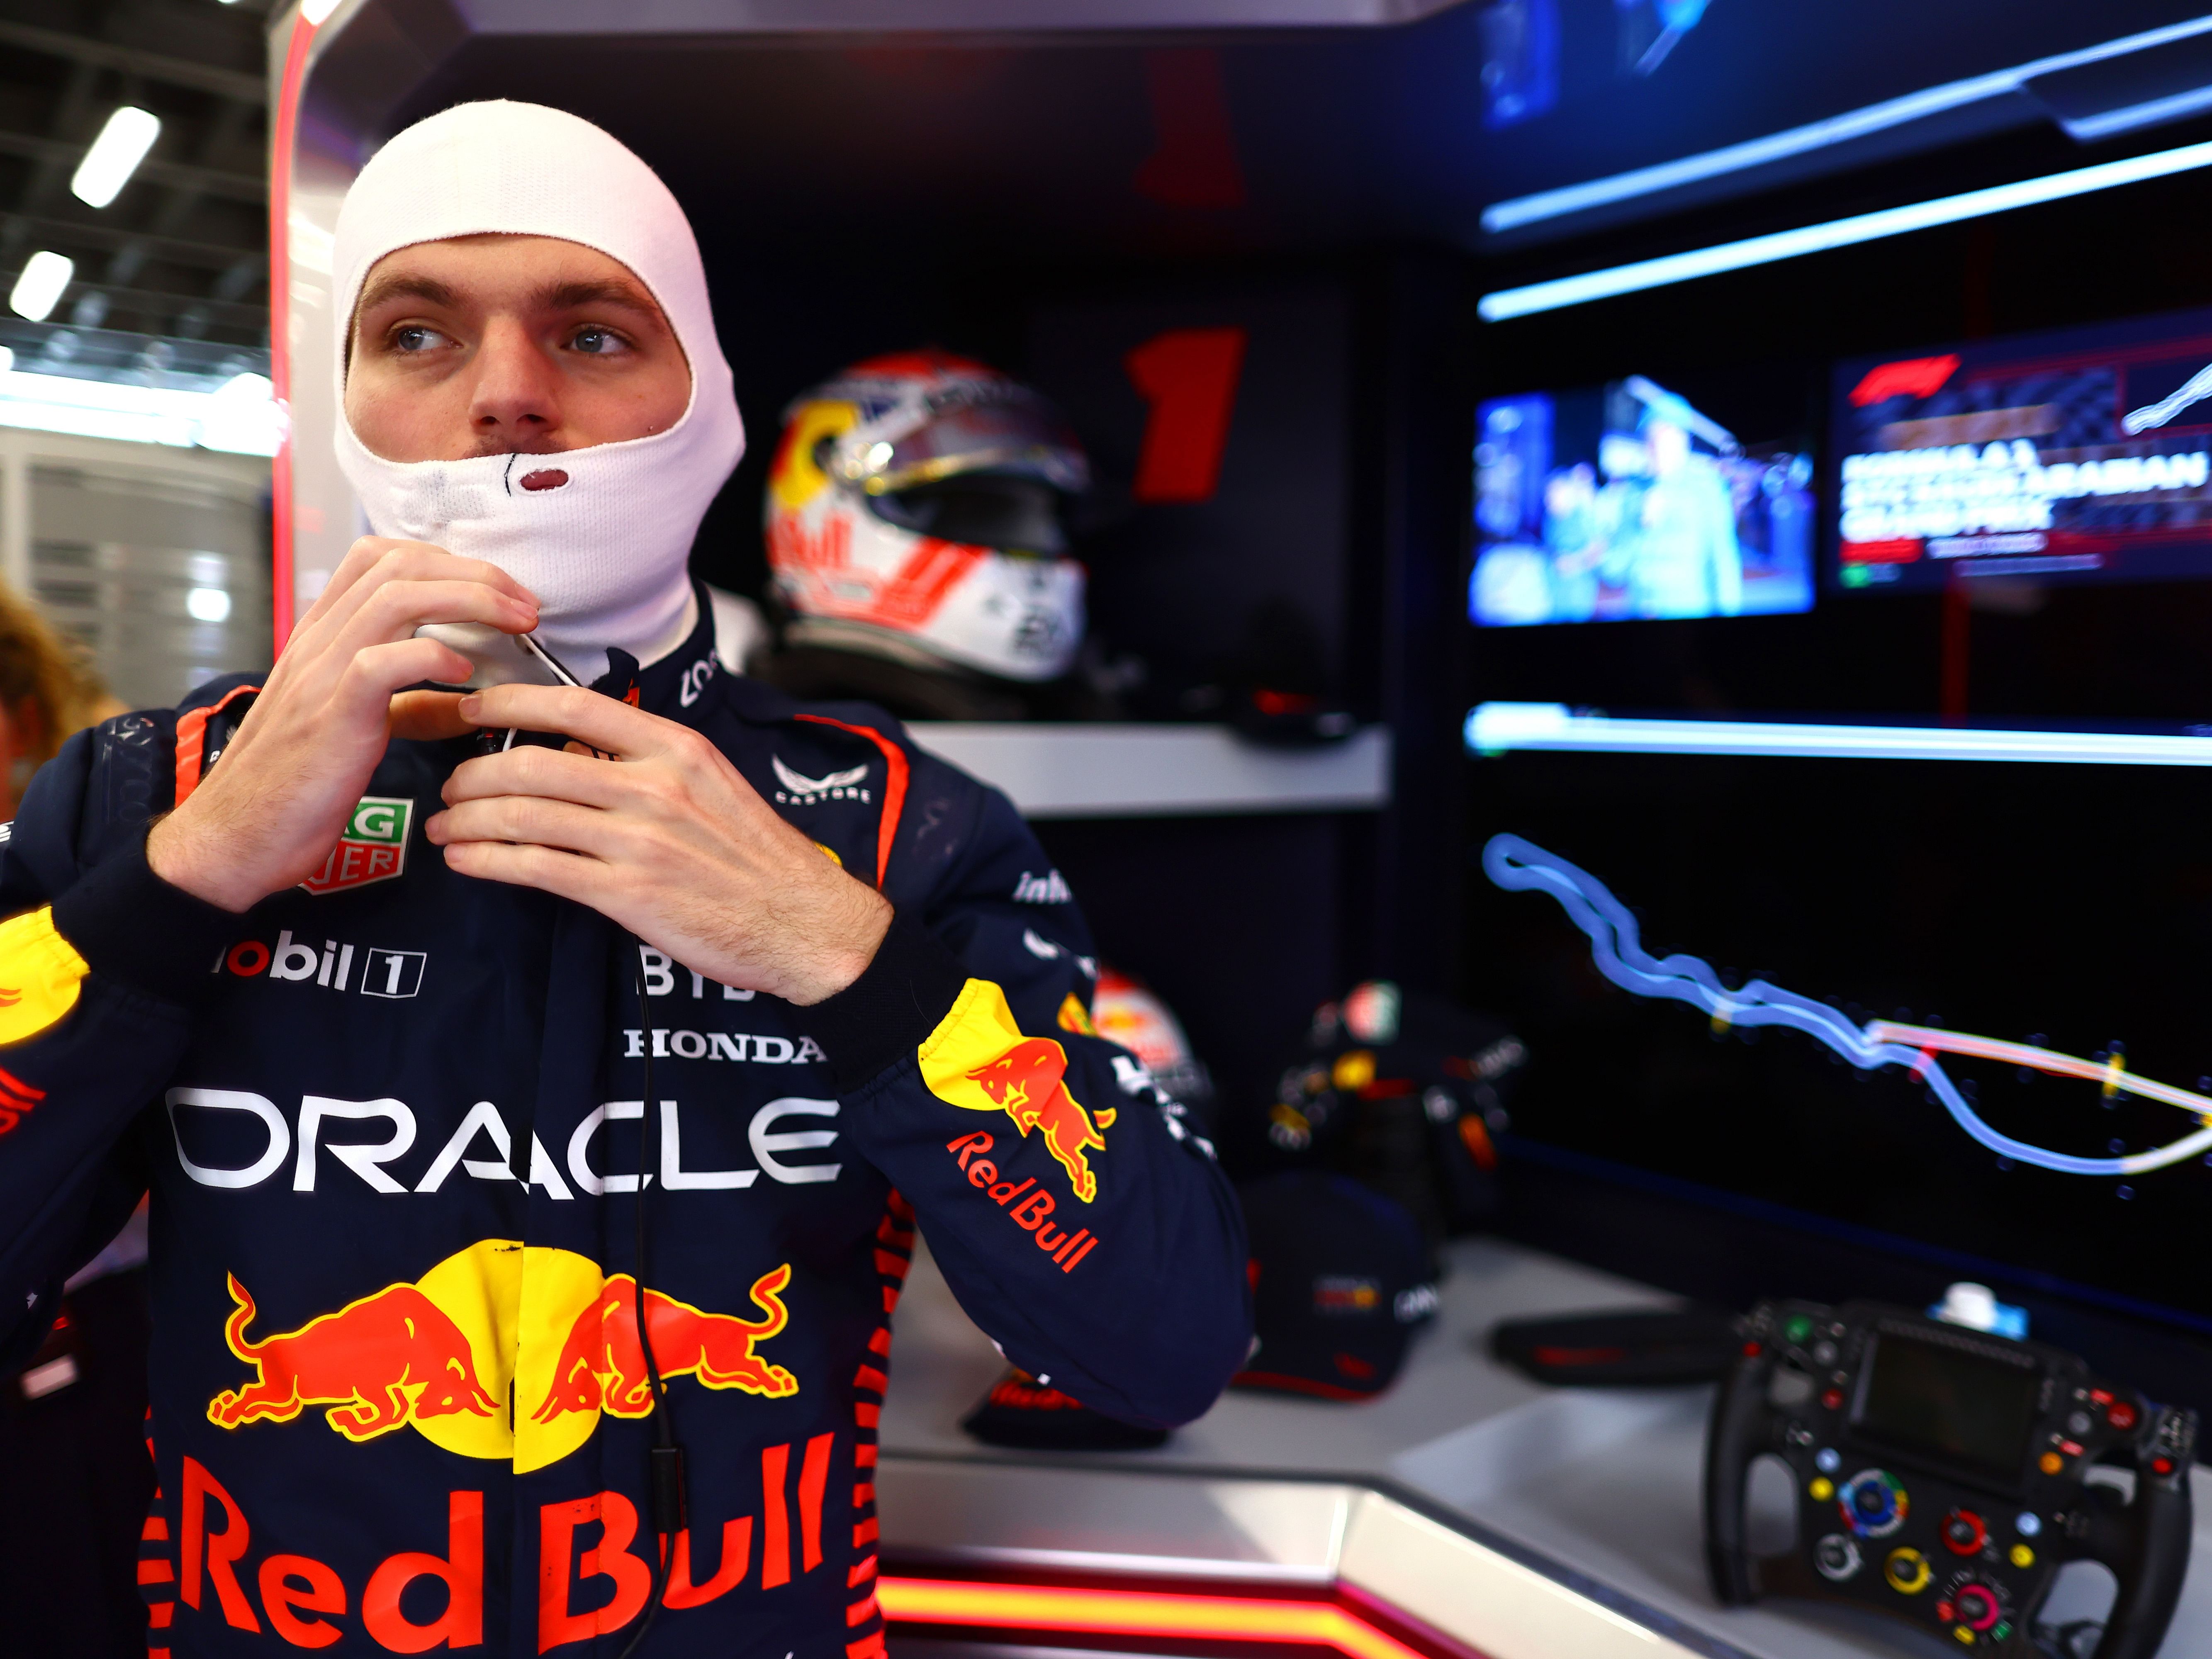 Max Verstappen prepares to drive in the garage during qualifying ahead of the 2023 F1 Saudi Arabian Grand Prix (Photo by Mark Thompson/Getty Images)